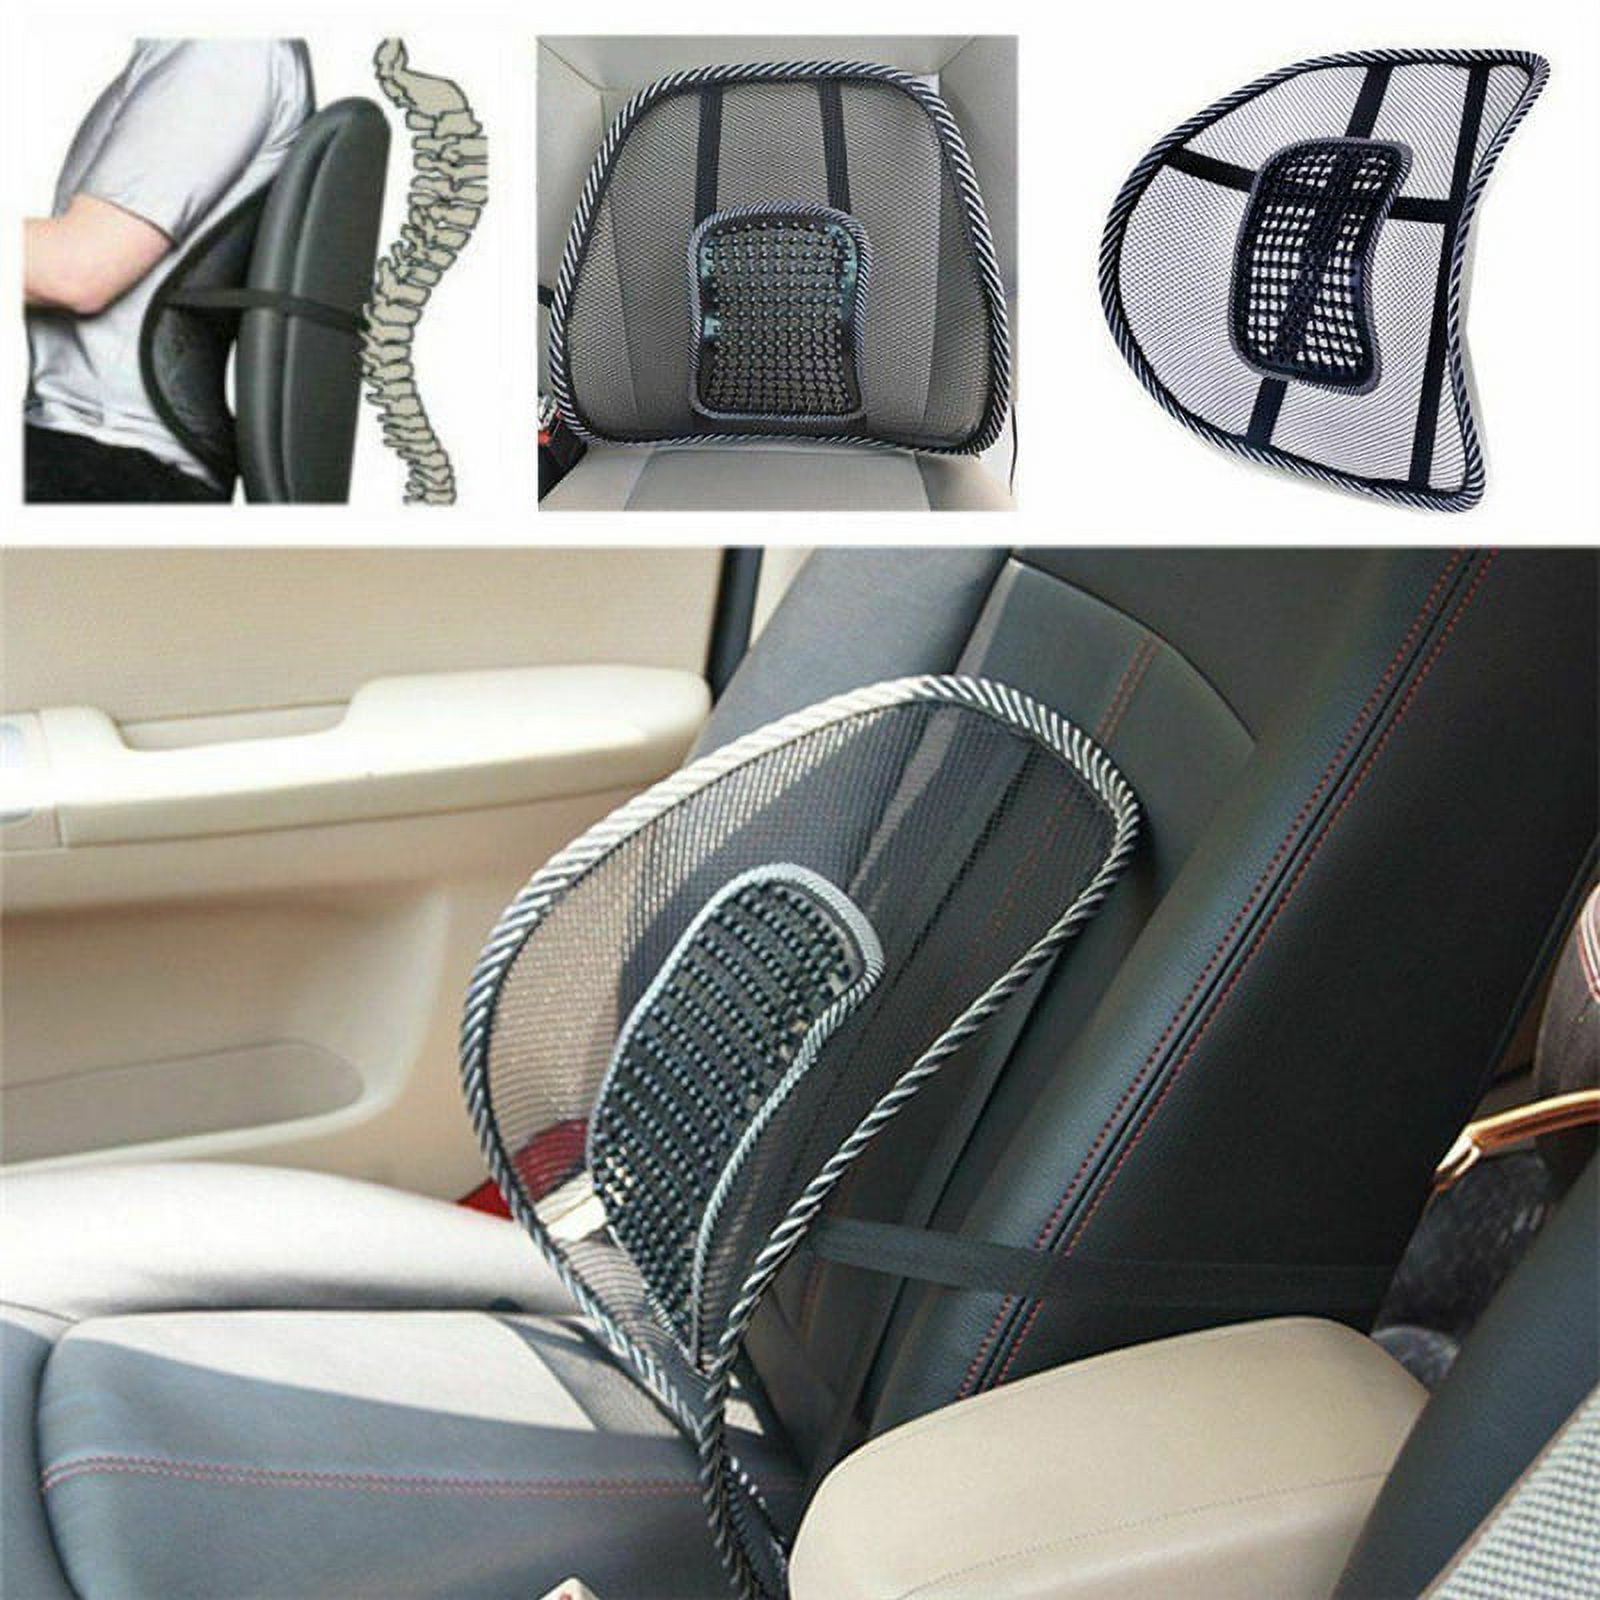 MeiBoAll Standard Size Ventilated Seat Cushion with Lumbar Support, Air  Flow Breathable Back Support Cushion, Car Seat Cushion Cool Pad for Comfort